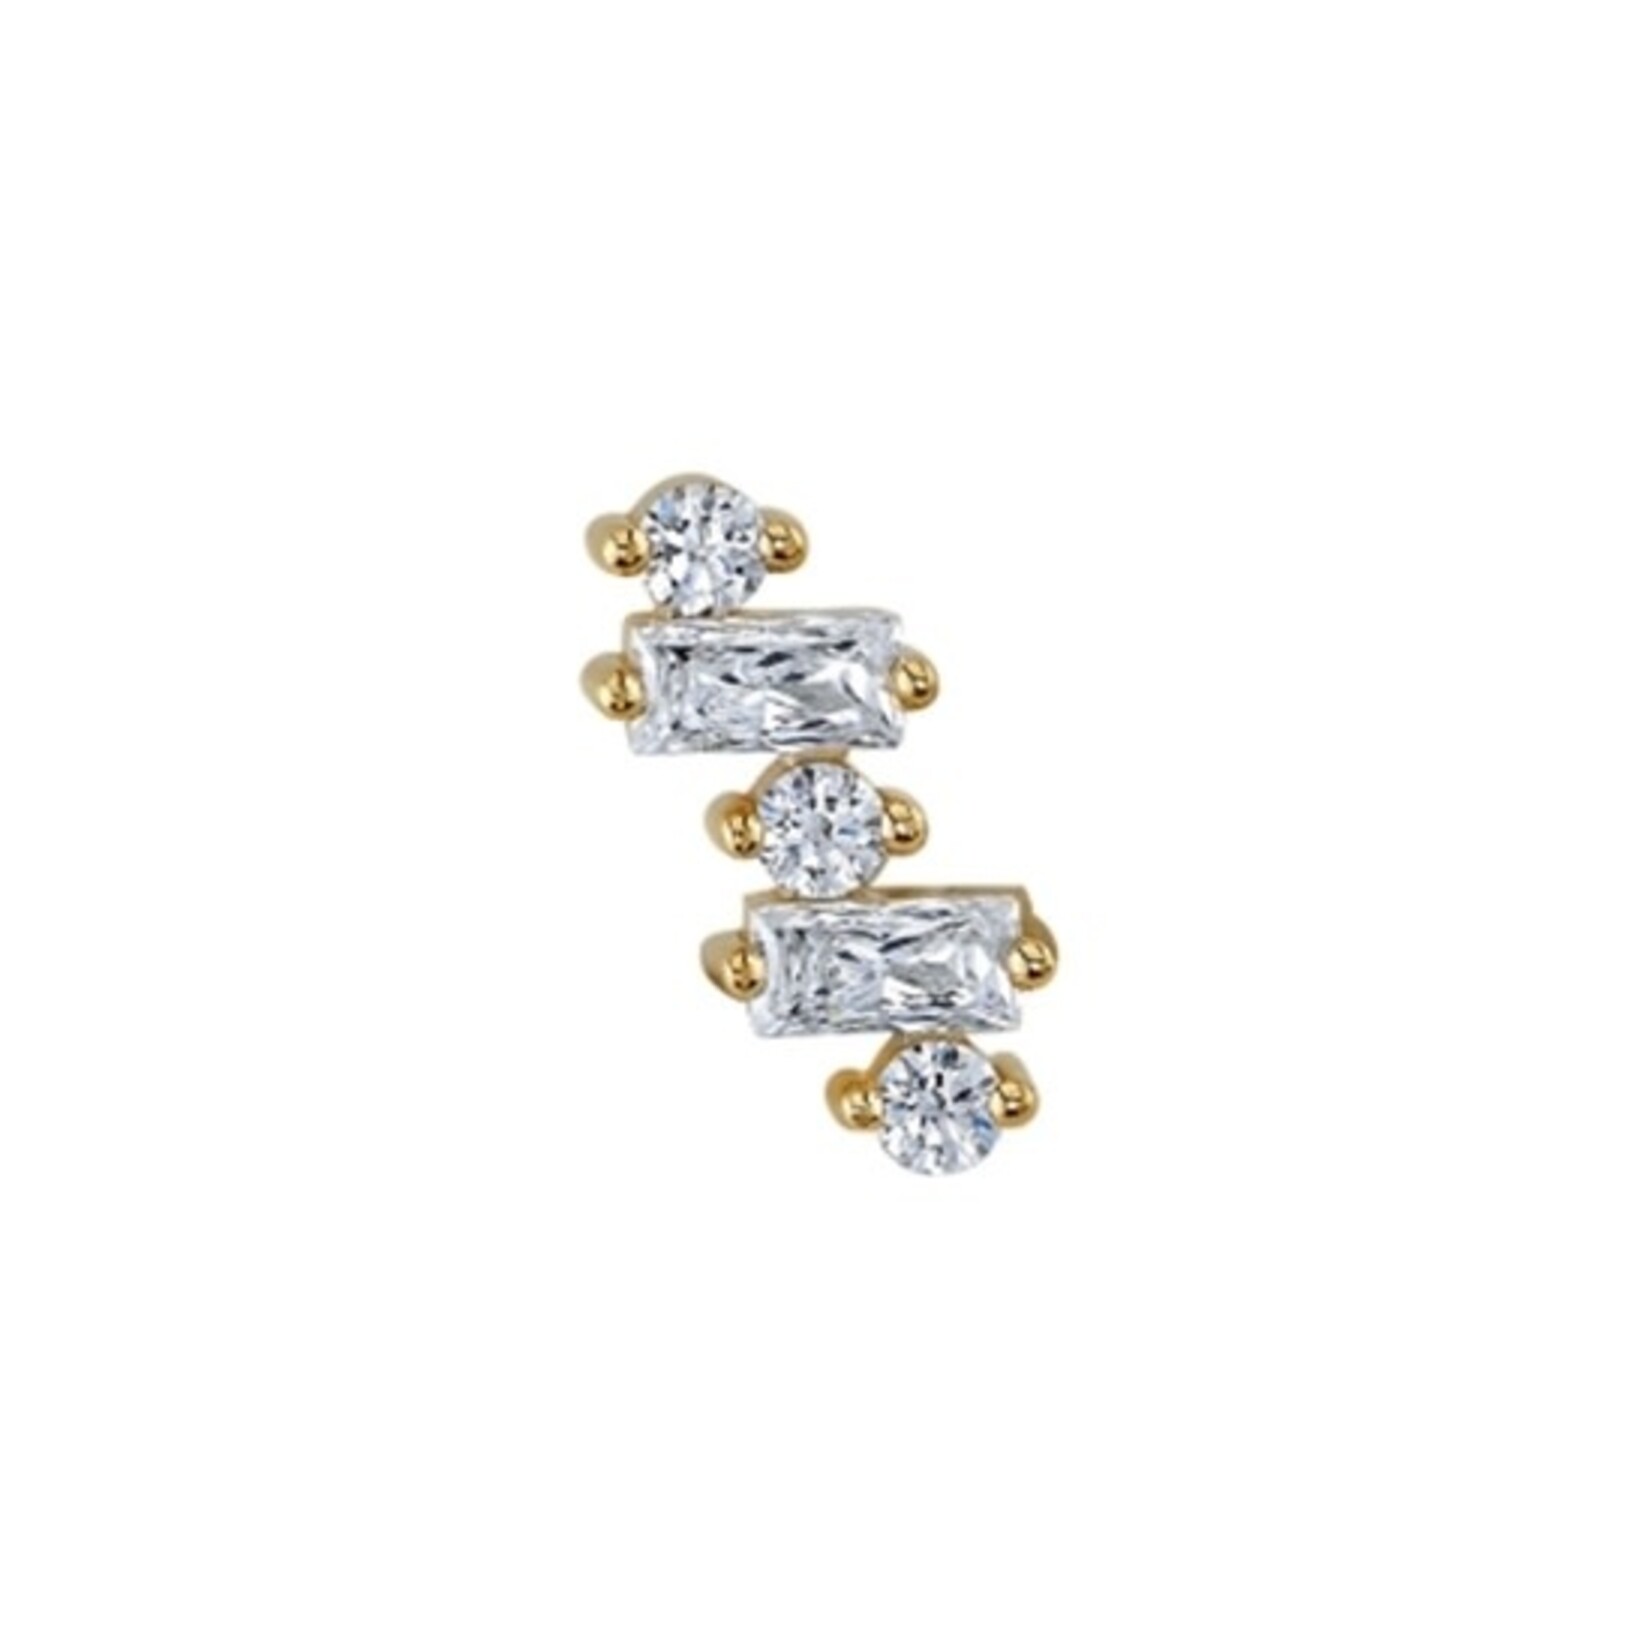 BVLA BVLA 8x4 "Divina" threaded end with 2x 3x1.5 CZ baguette and 3x 1.5 baguette